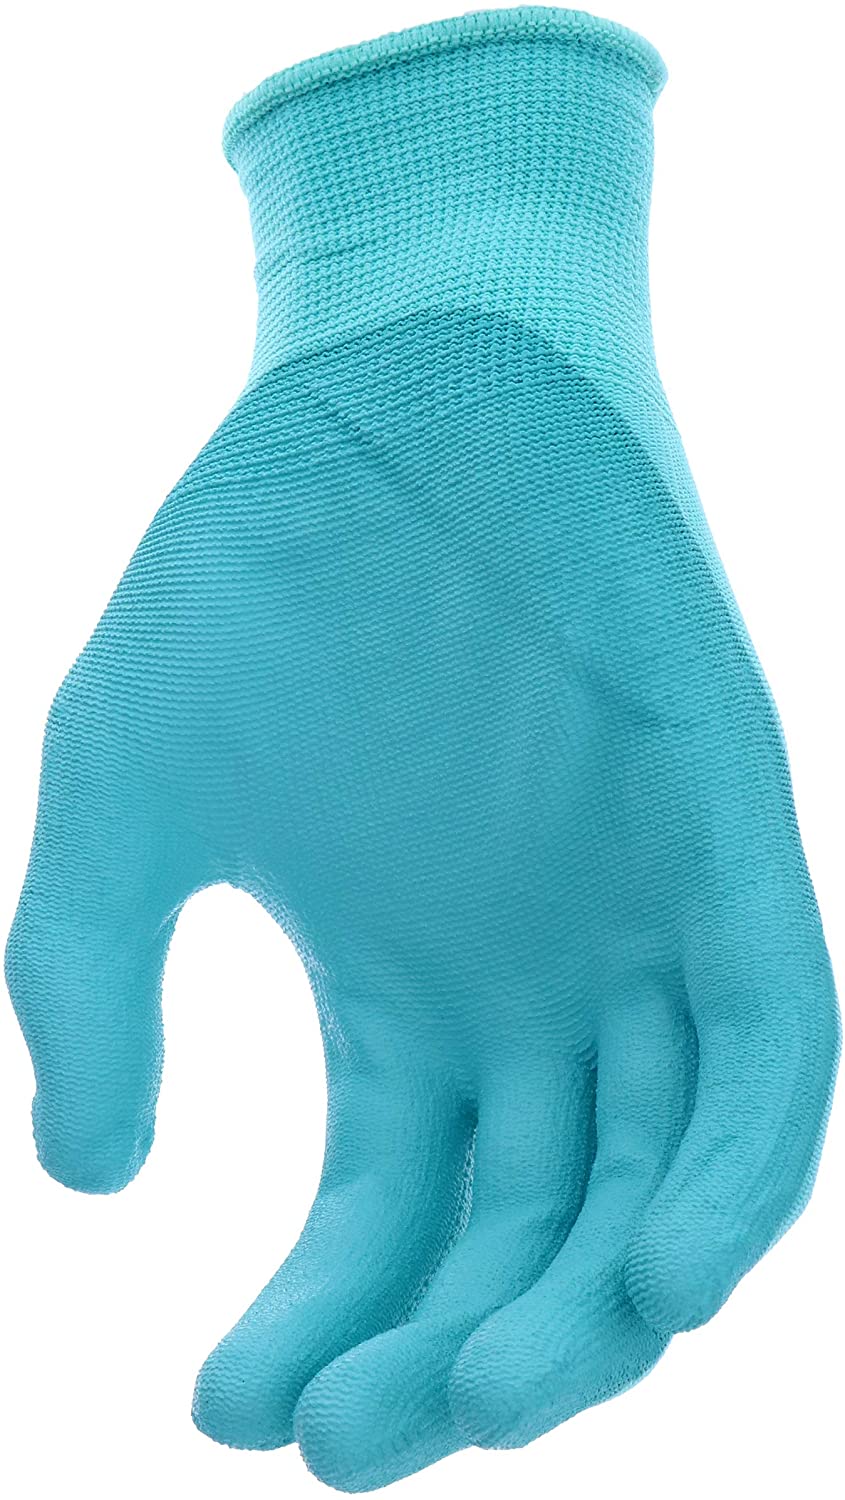 West Chester Womens Miracle Gro Polyurethane Coated Knit Garden Glove